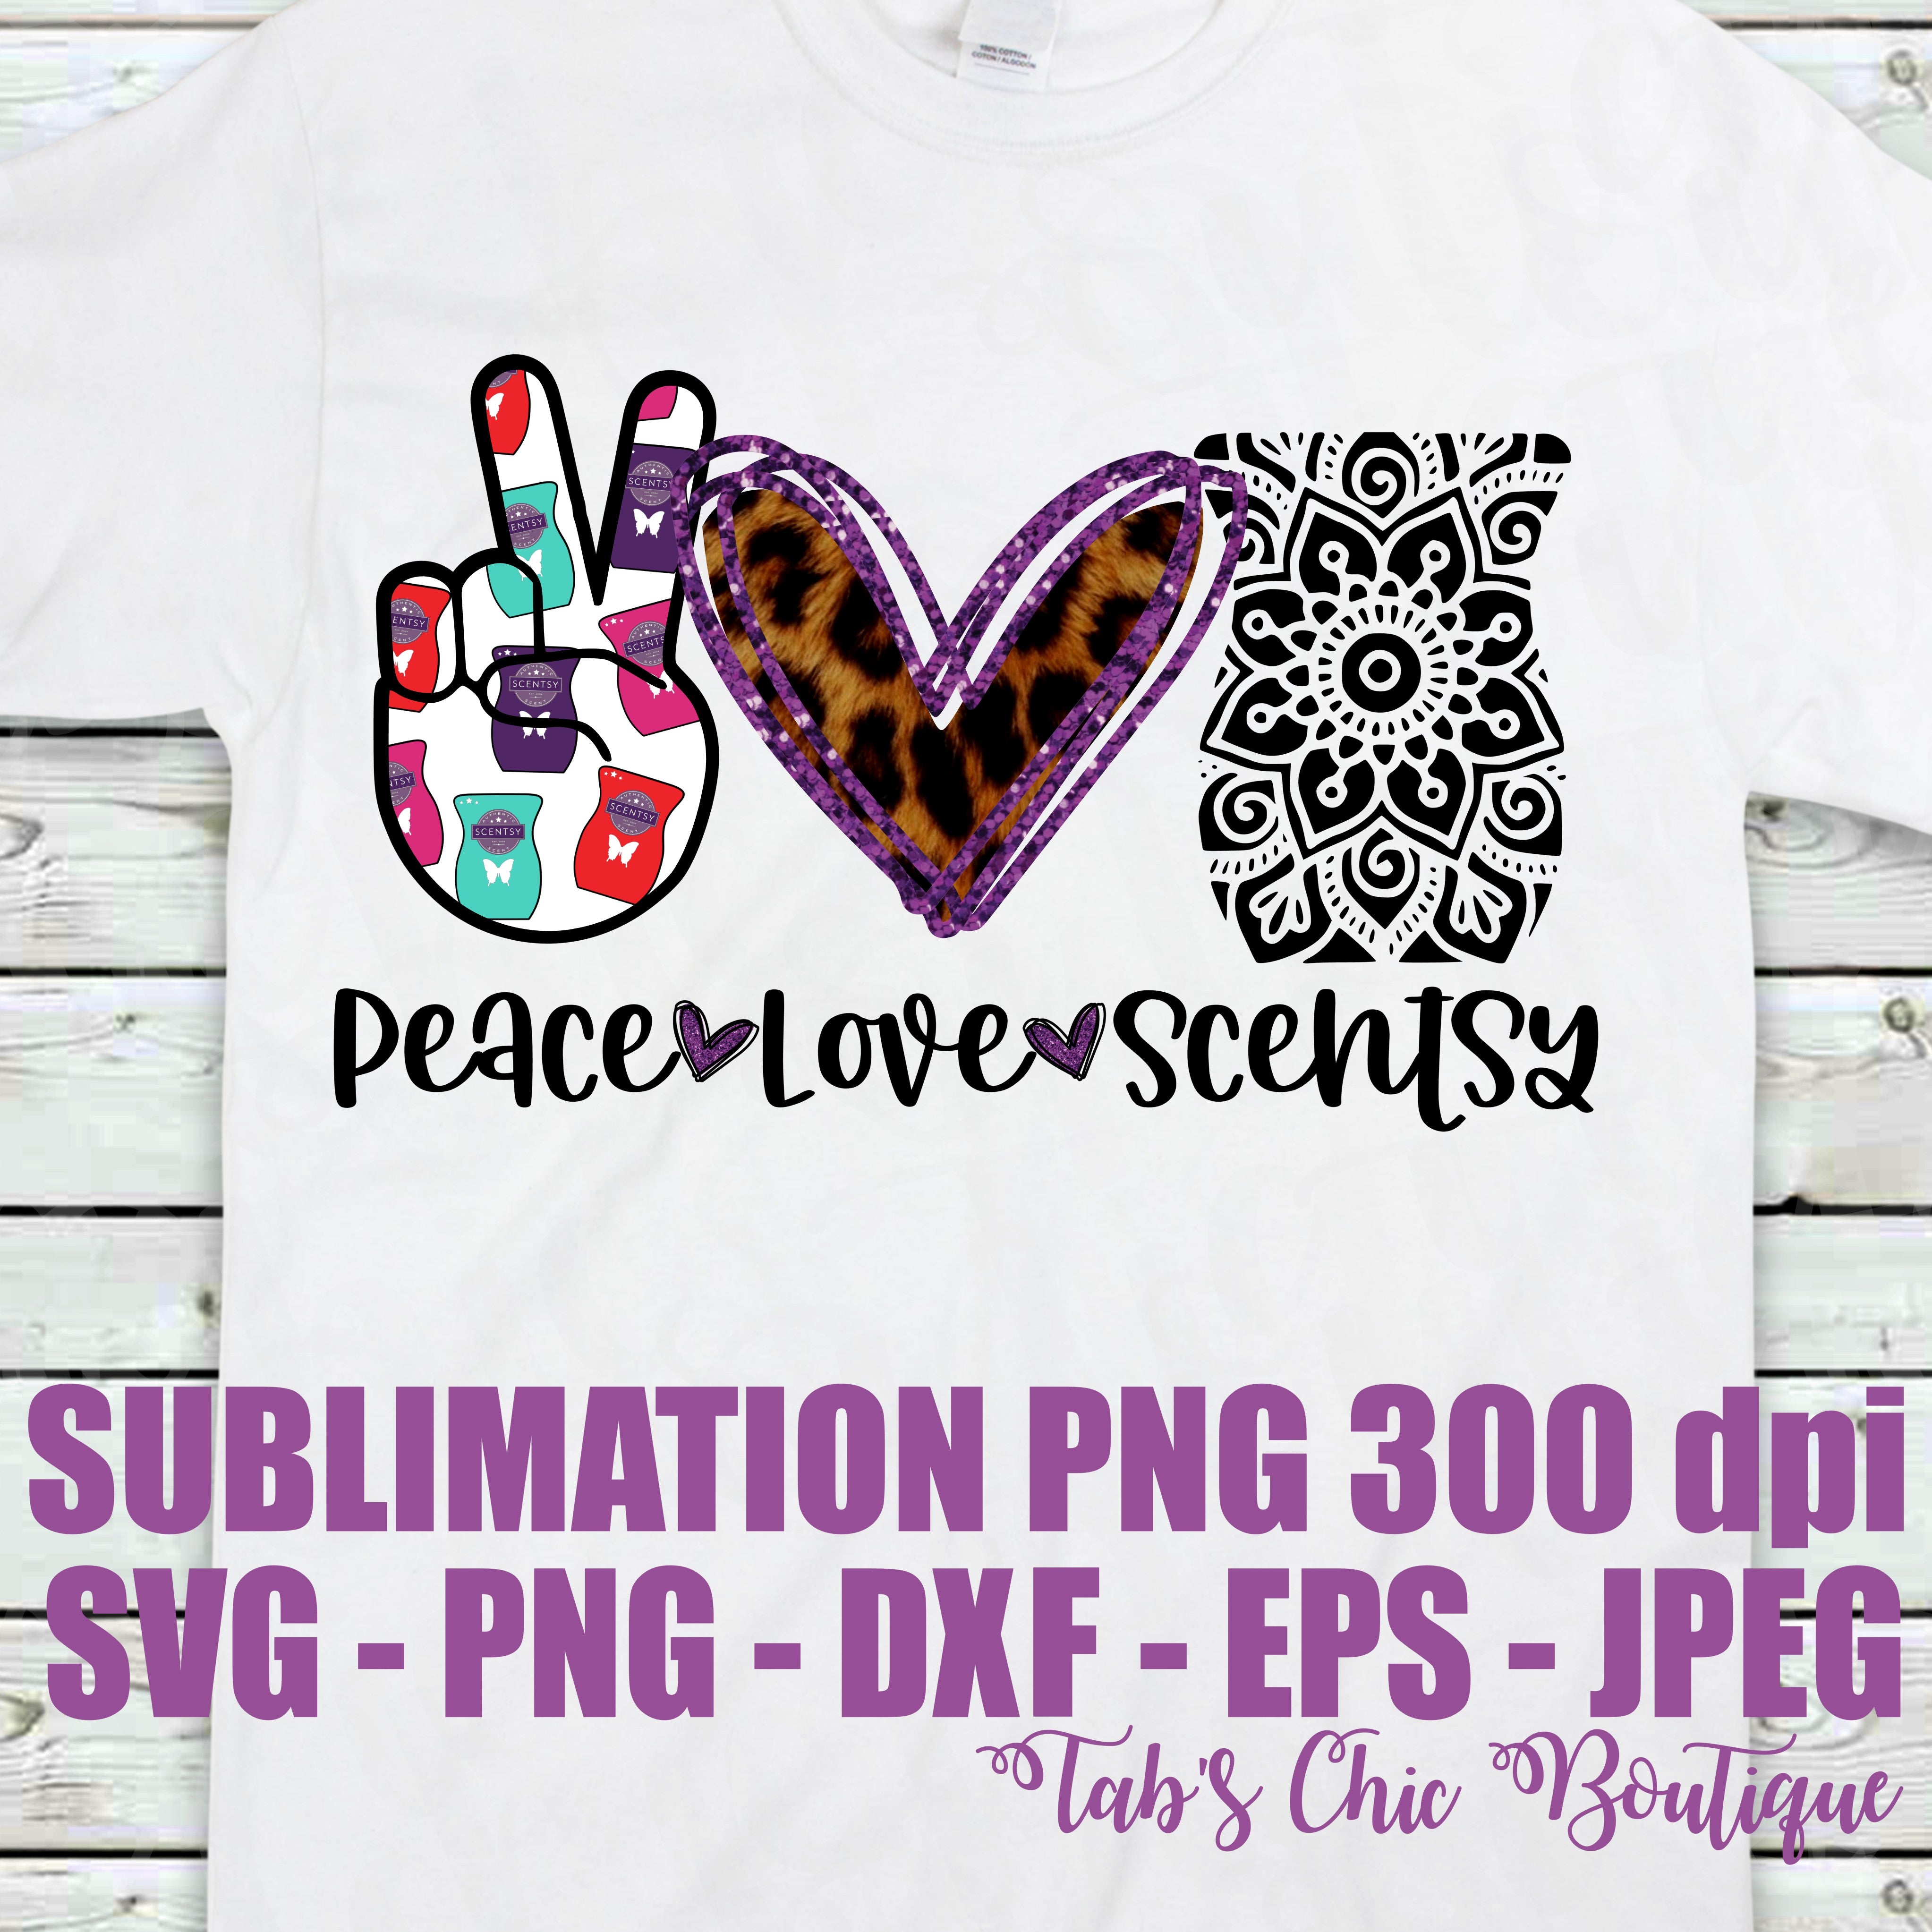 Peace Love Scentsy Svg Png Jpeg Dxf Eps 300dpi Sublimation Design Cutt Tab S Chic Boutique